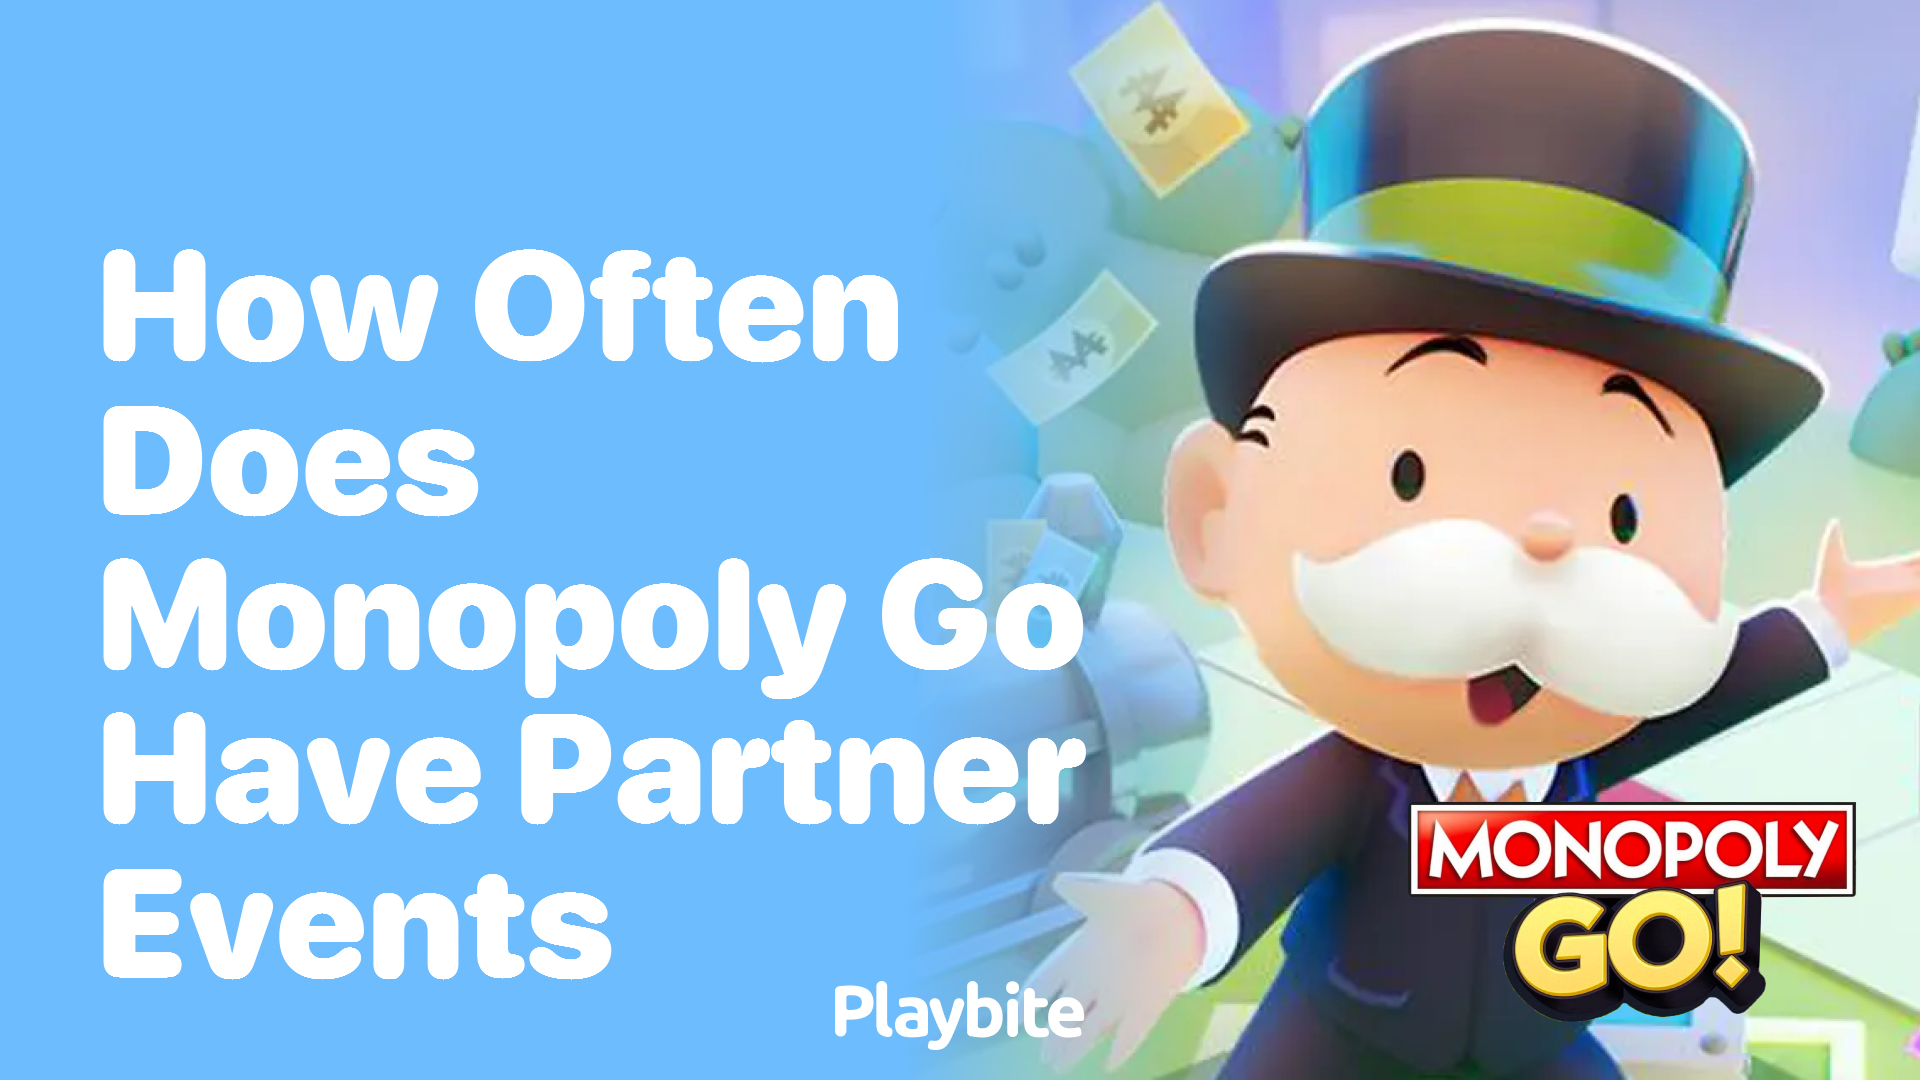 How often does Monopoly Go have partner events?